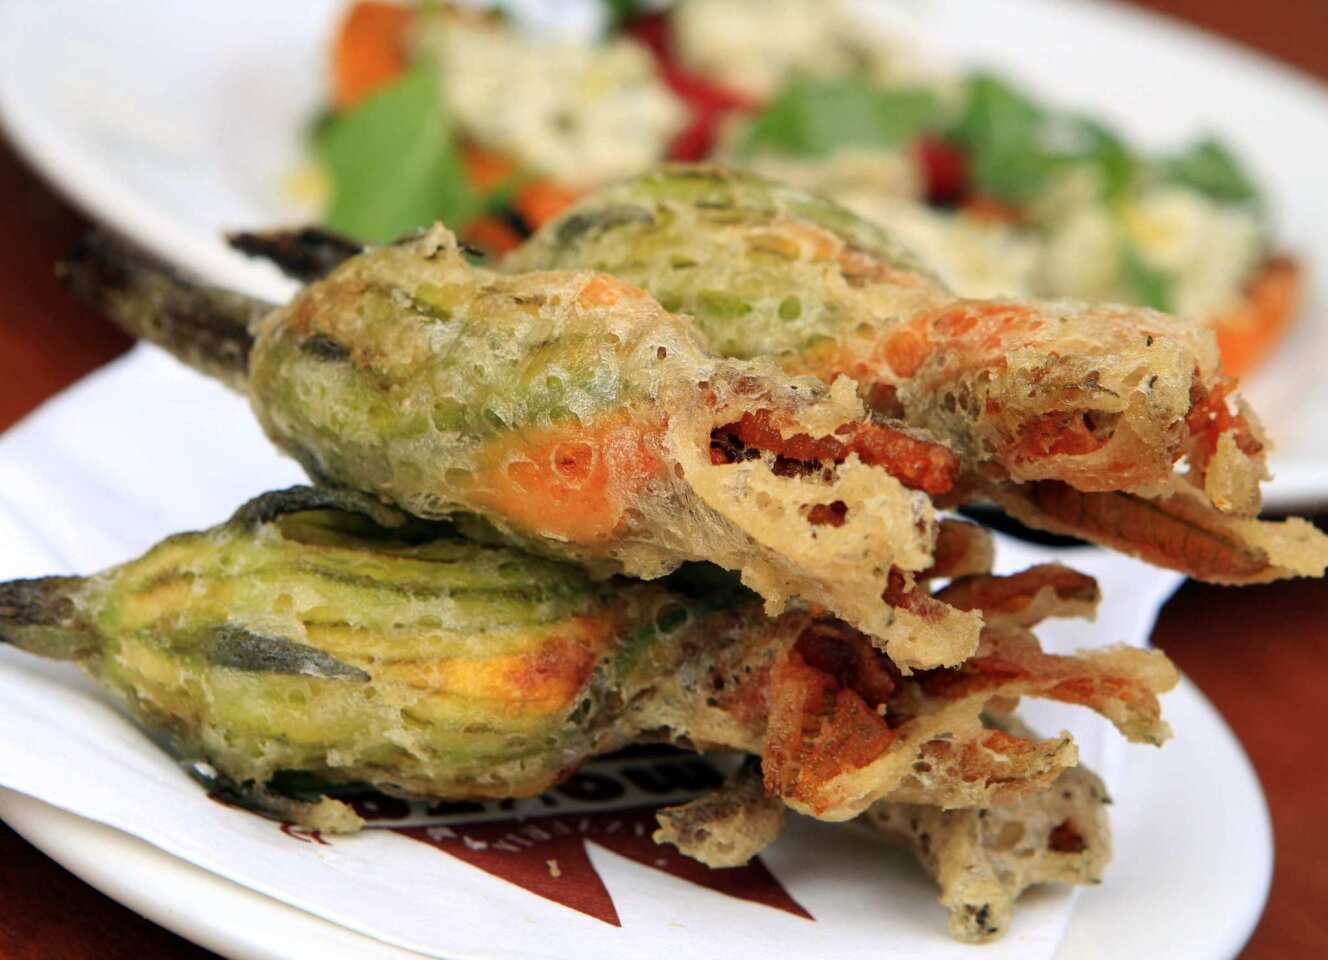 Fried squash blossoms are coated in a crisp batter and stuffed with ricotta.